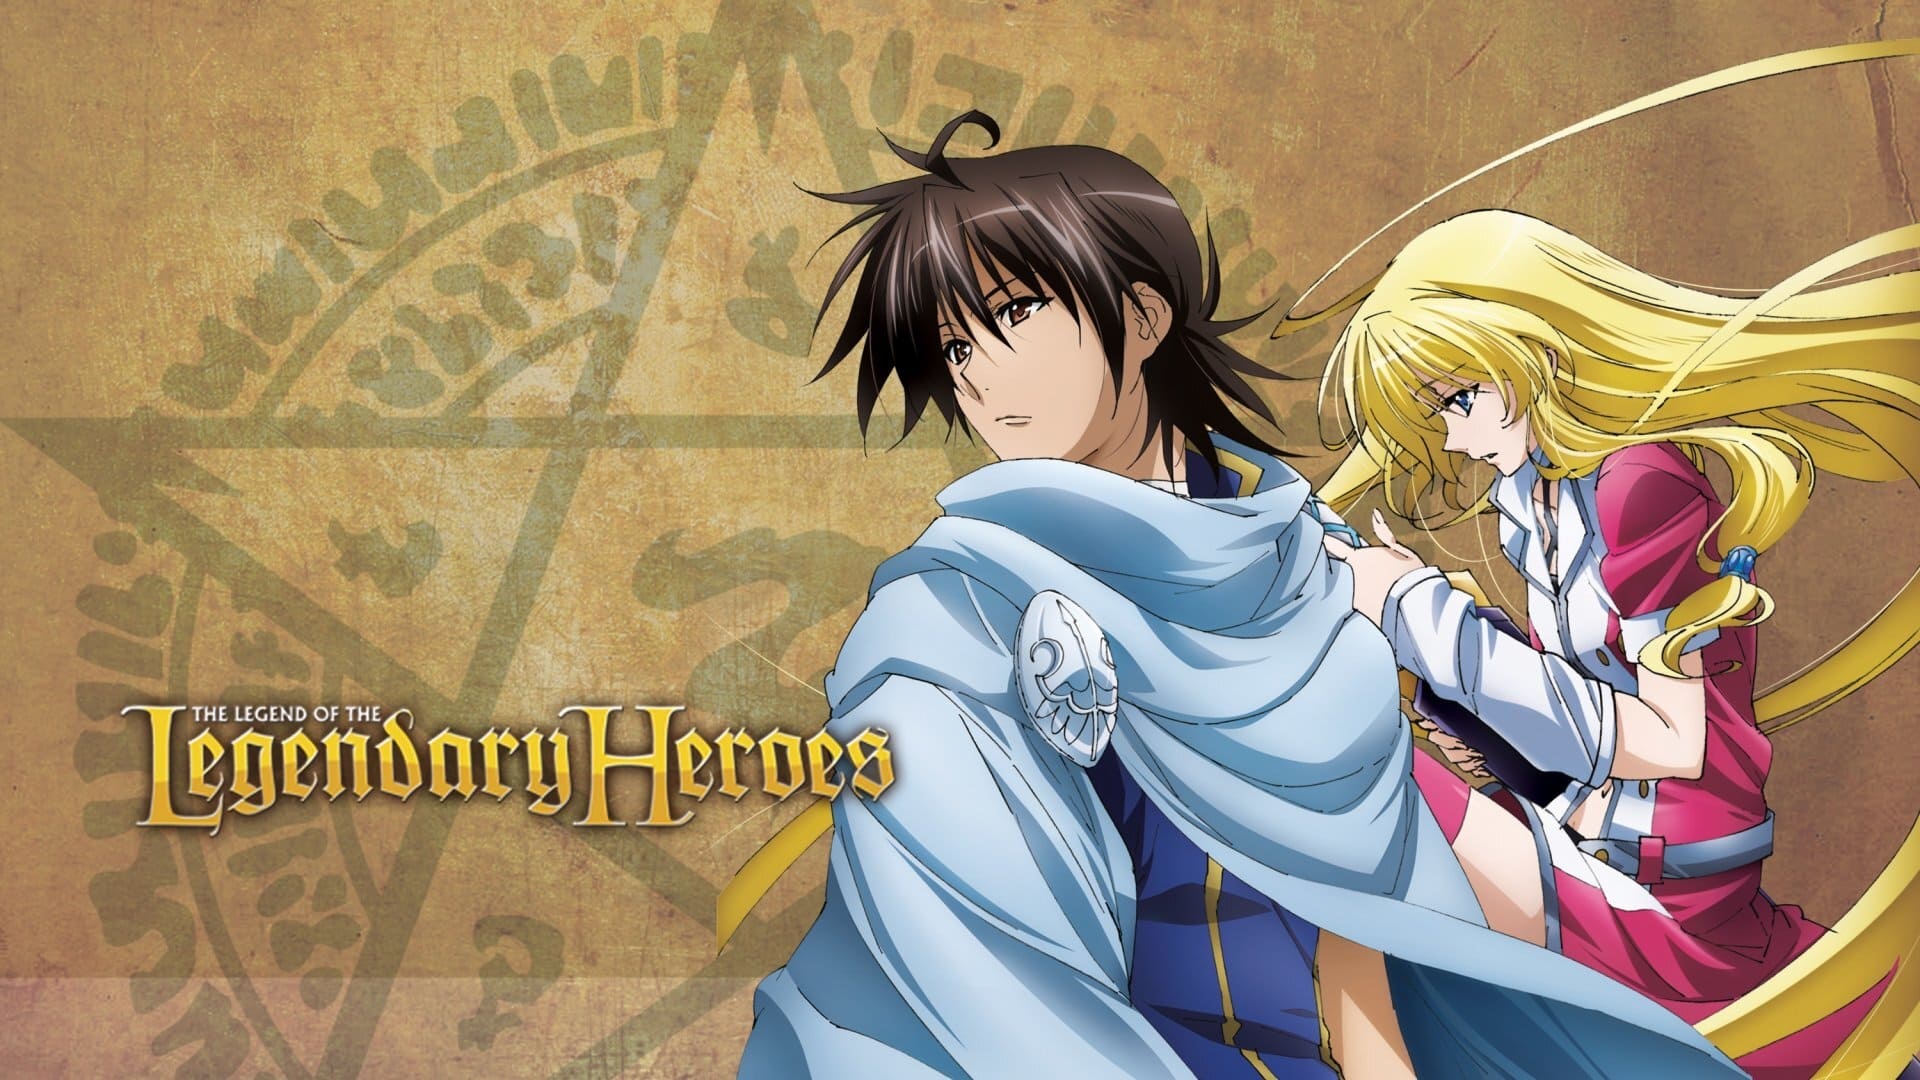 The Legend of the Legendary Heroes (TV Series 2010-2010